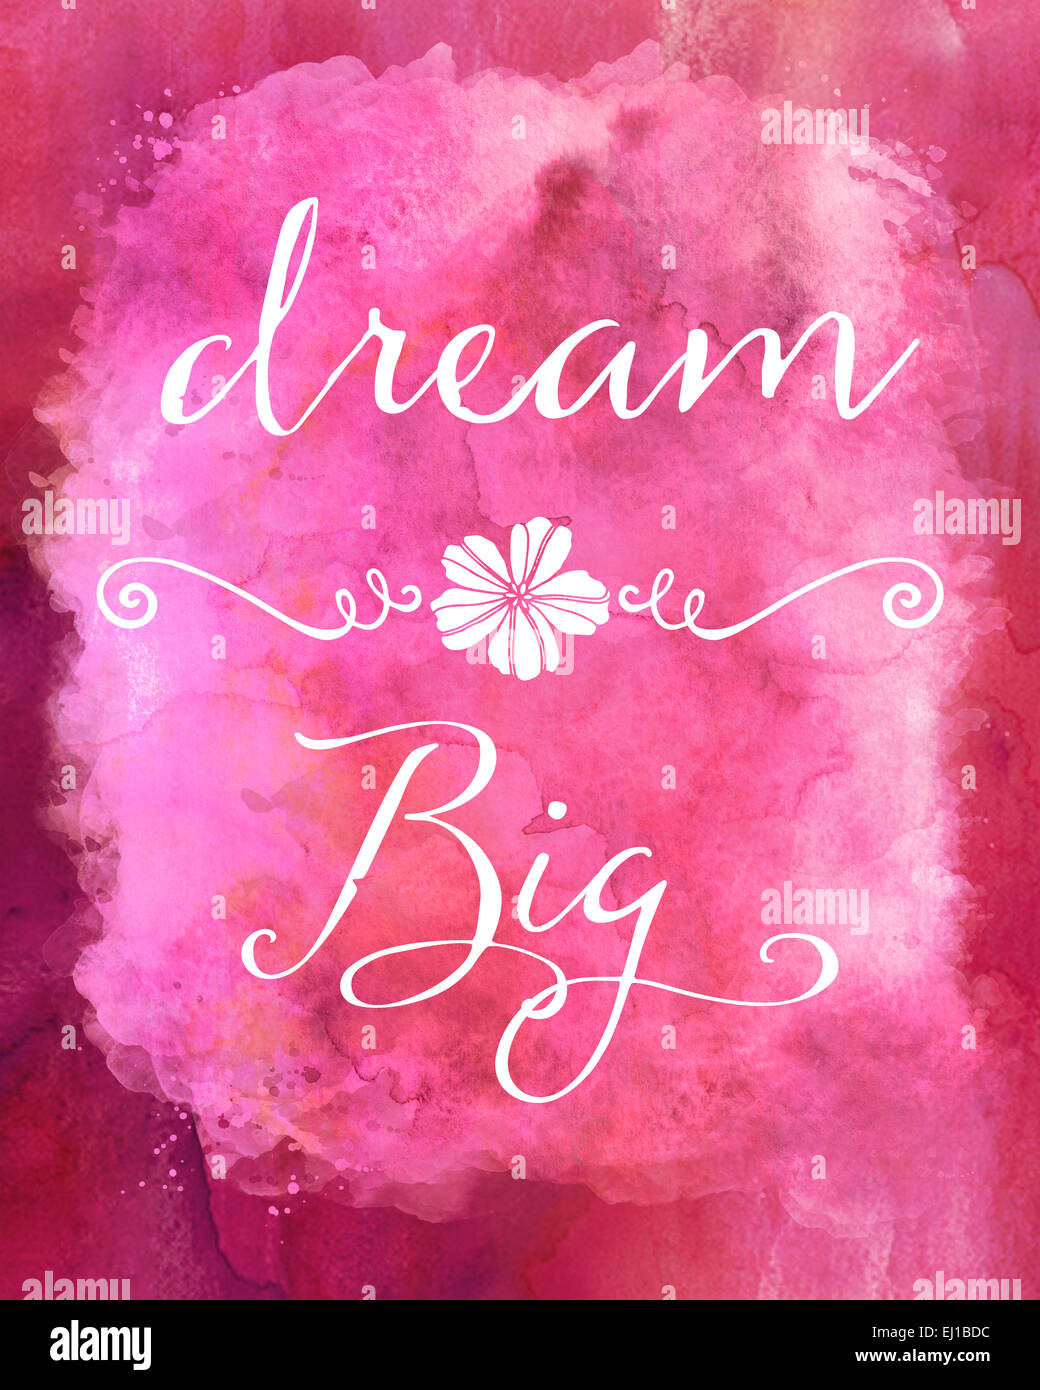 Dream Big Pink Watercolor Inspirational Quote Stock Photo